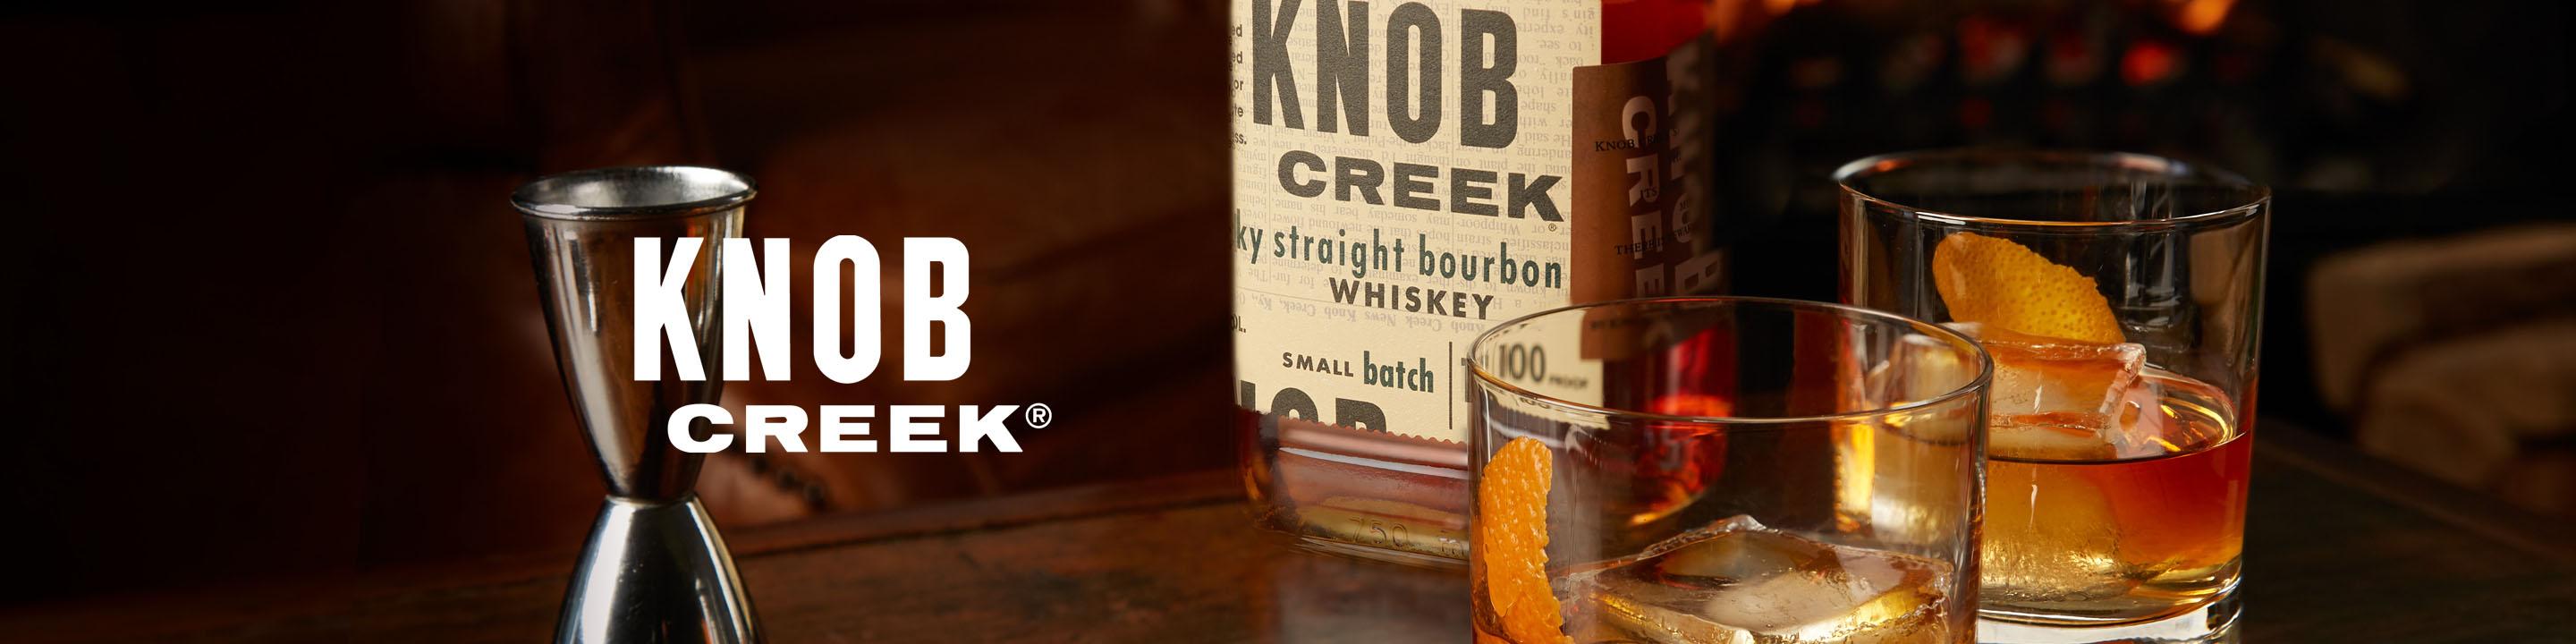 Knob Creek® Kentucky Straight Bourbon Whiskey is still made to exacting standards. Knob Creek® is aged to fully draw out the natural sugars in its charred white oak barrels. This exceptional, full-bodied bourbon strikes the senses with an oak aroma, a sweet, woody, full-bodied, almost fruity taste, with a long, rich finish. Created to reflect the flavor, strength, care, and patience that defined whiskey before Prohibition.

Buy Knob Creek online now from nearby liquor stores via Minibar Delivery.